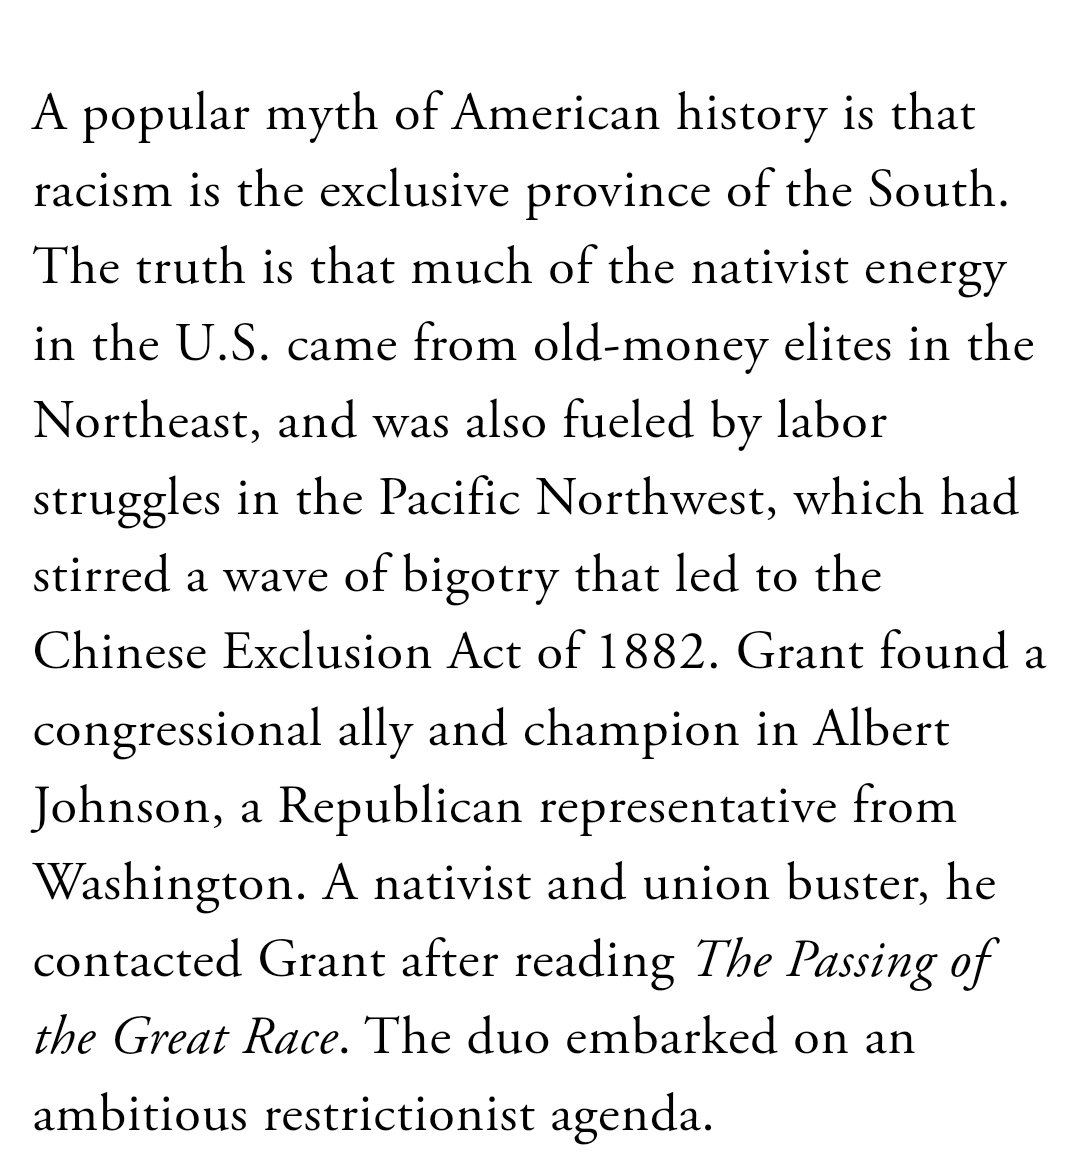 Much of the nativist energy in the U.S. came from old-money elites in the Northeast, and was also fueled by labor struggles in the Pacific Northwest, which had stirred a wave of bigotry that led to the Chinese Exclusion Act of 1882.